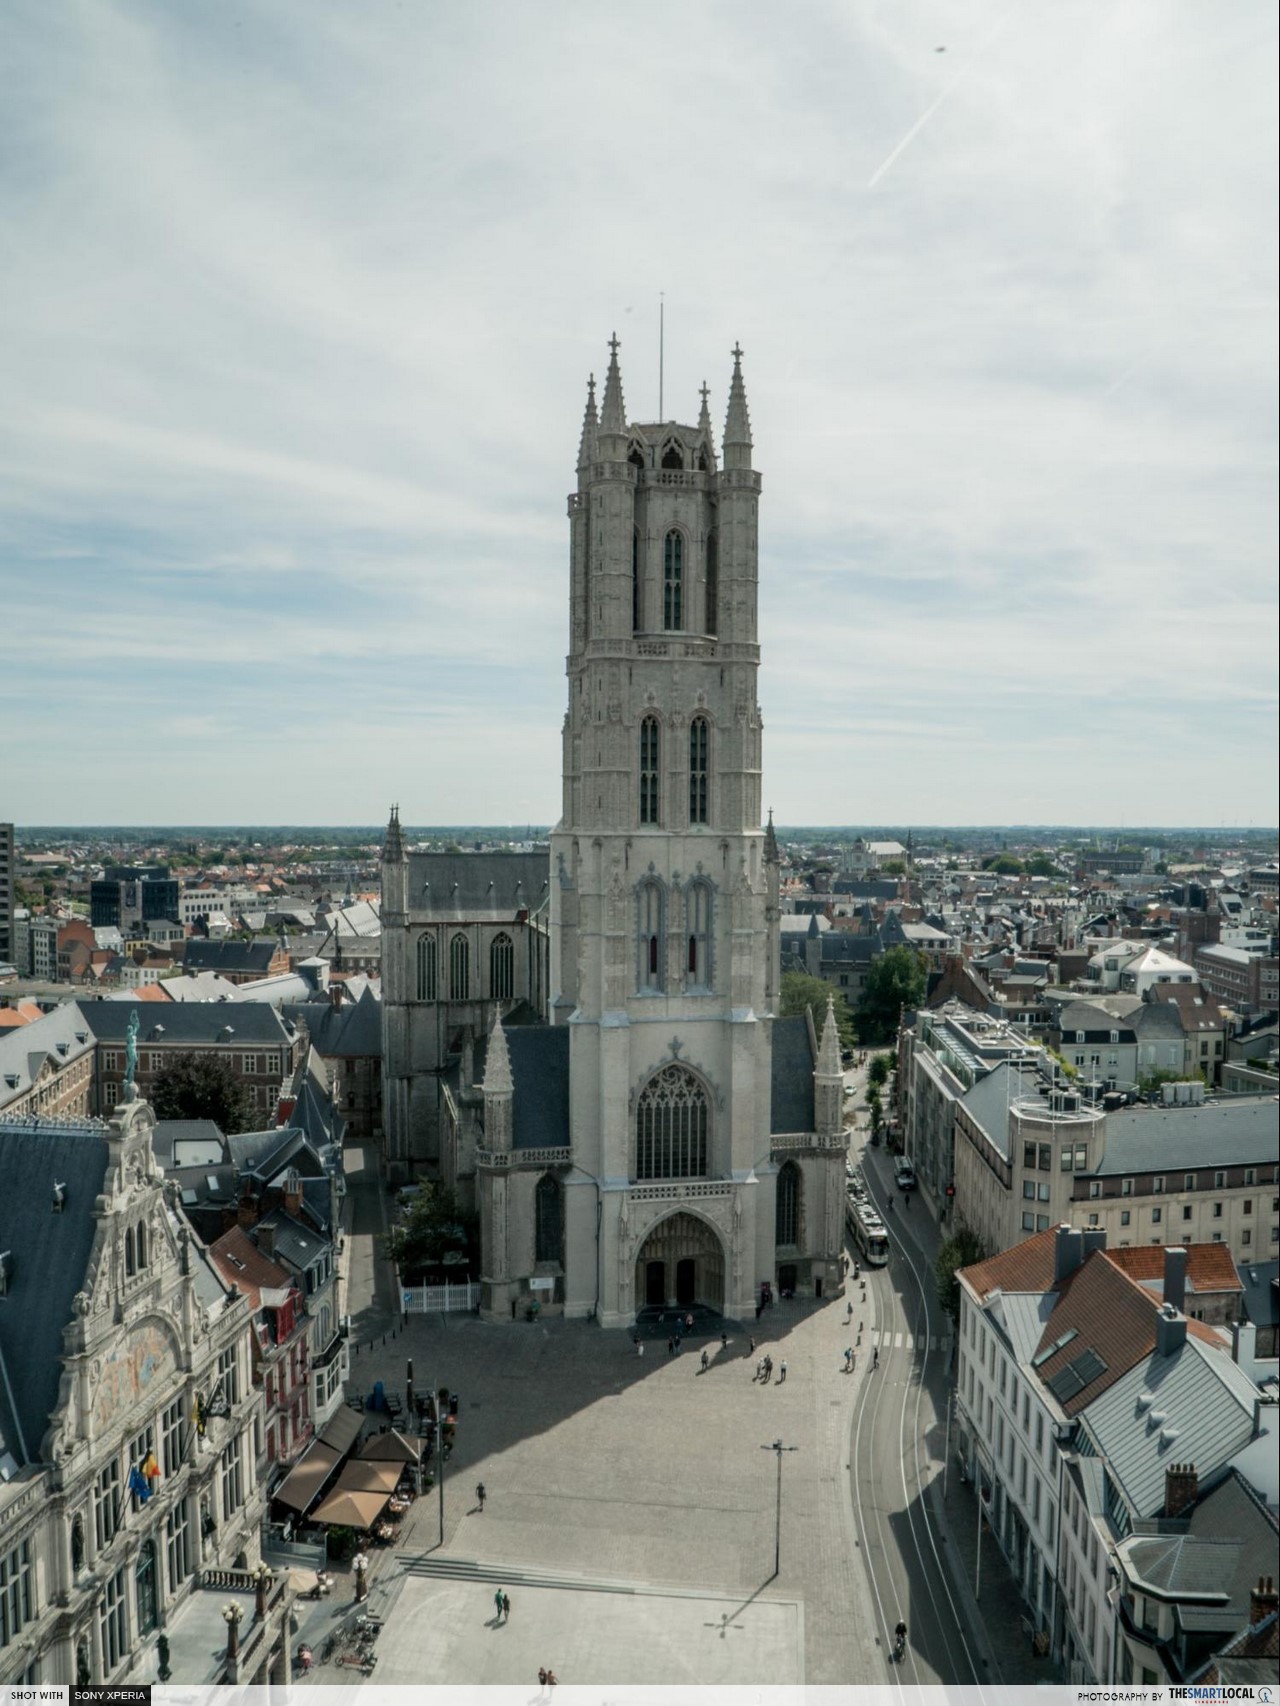 Brussels 7 things (8) - Ghent cathedral